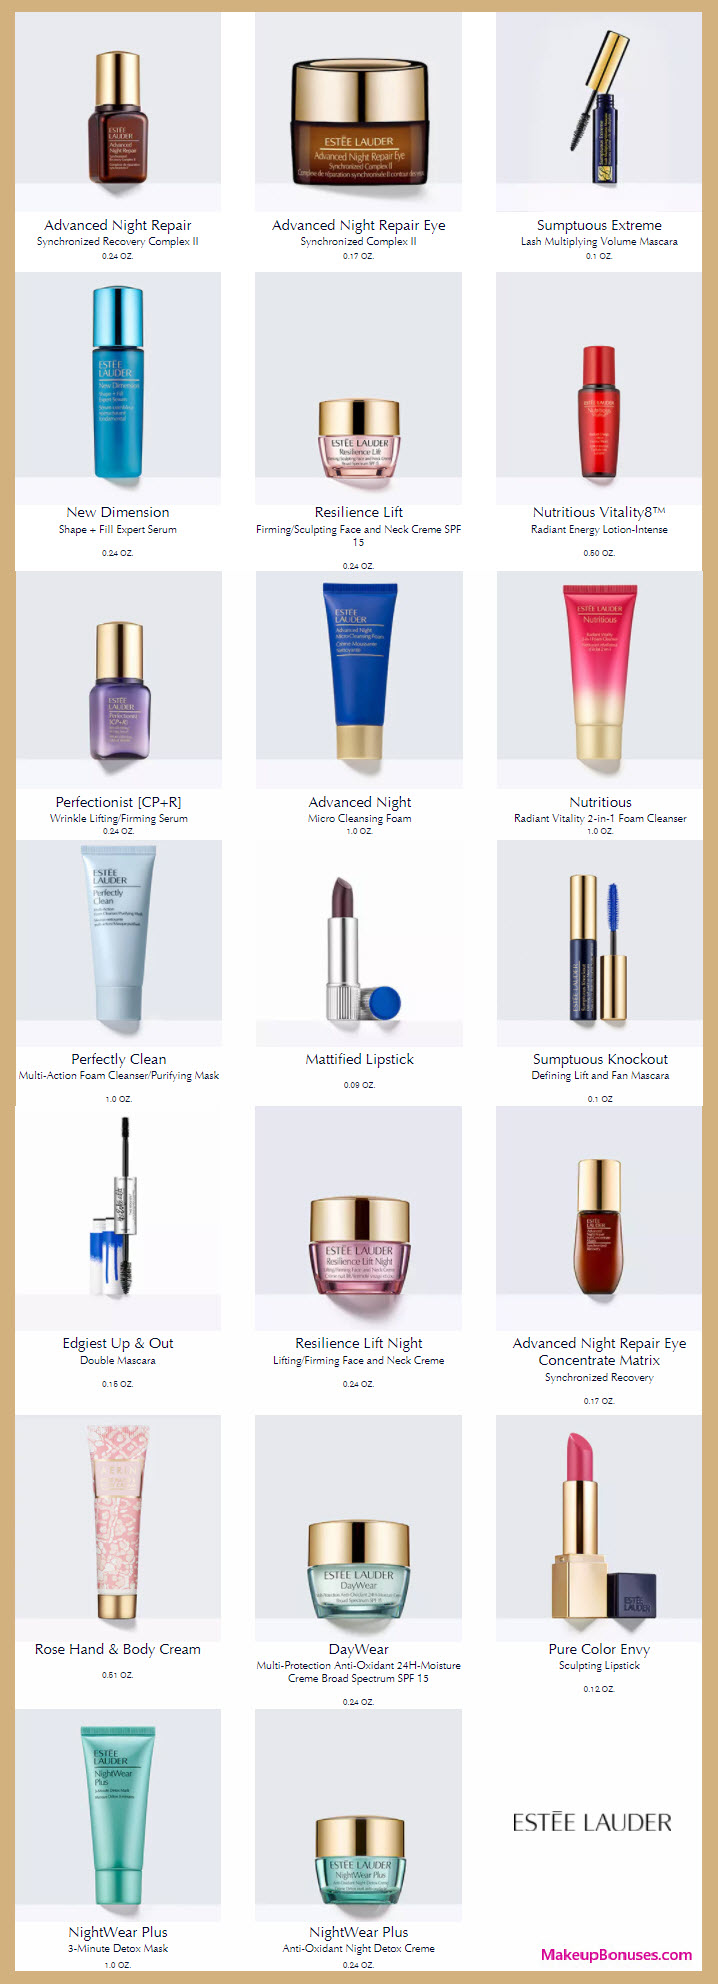 Receive your choice of 3-pc gift with your $75 Estée Lauder purchase